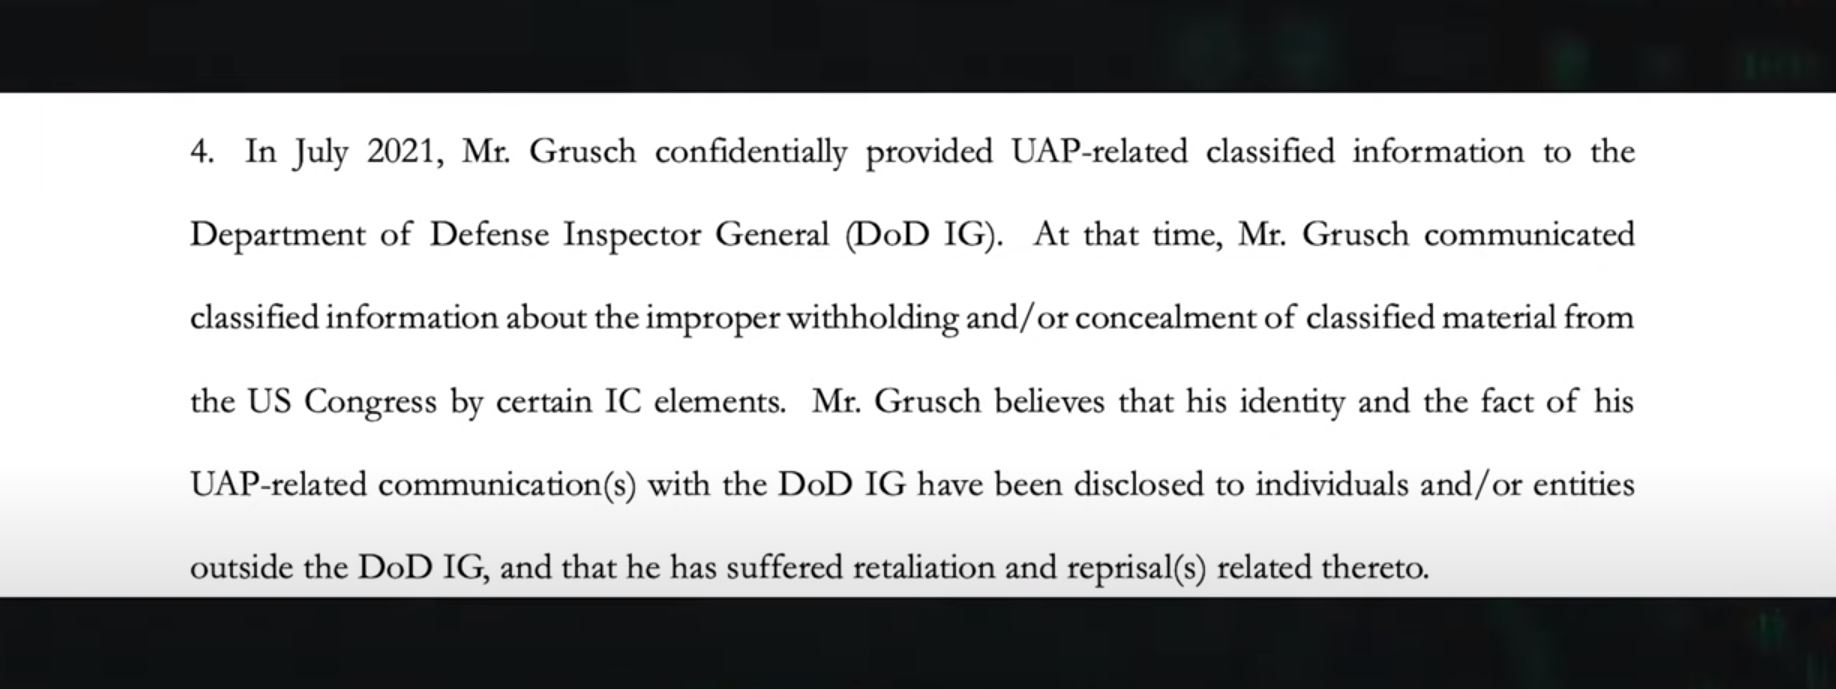 An official document confirms that in 2021 Grusch reported the case to the US Department of Defense.